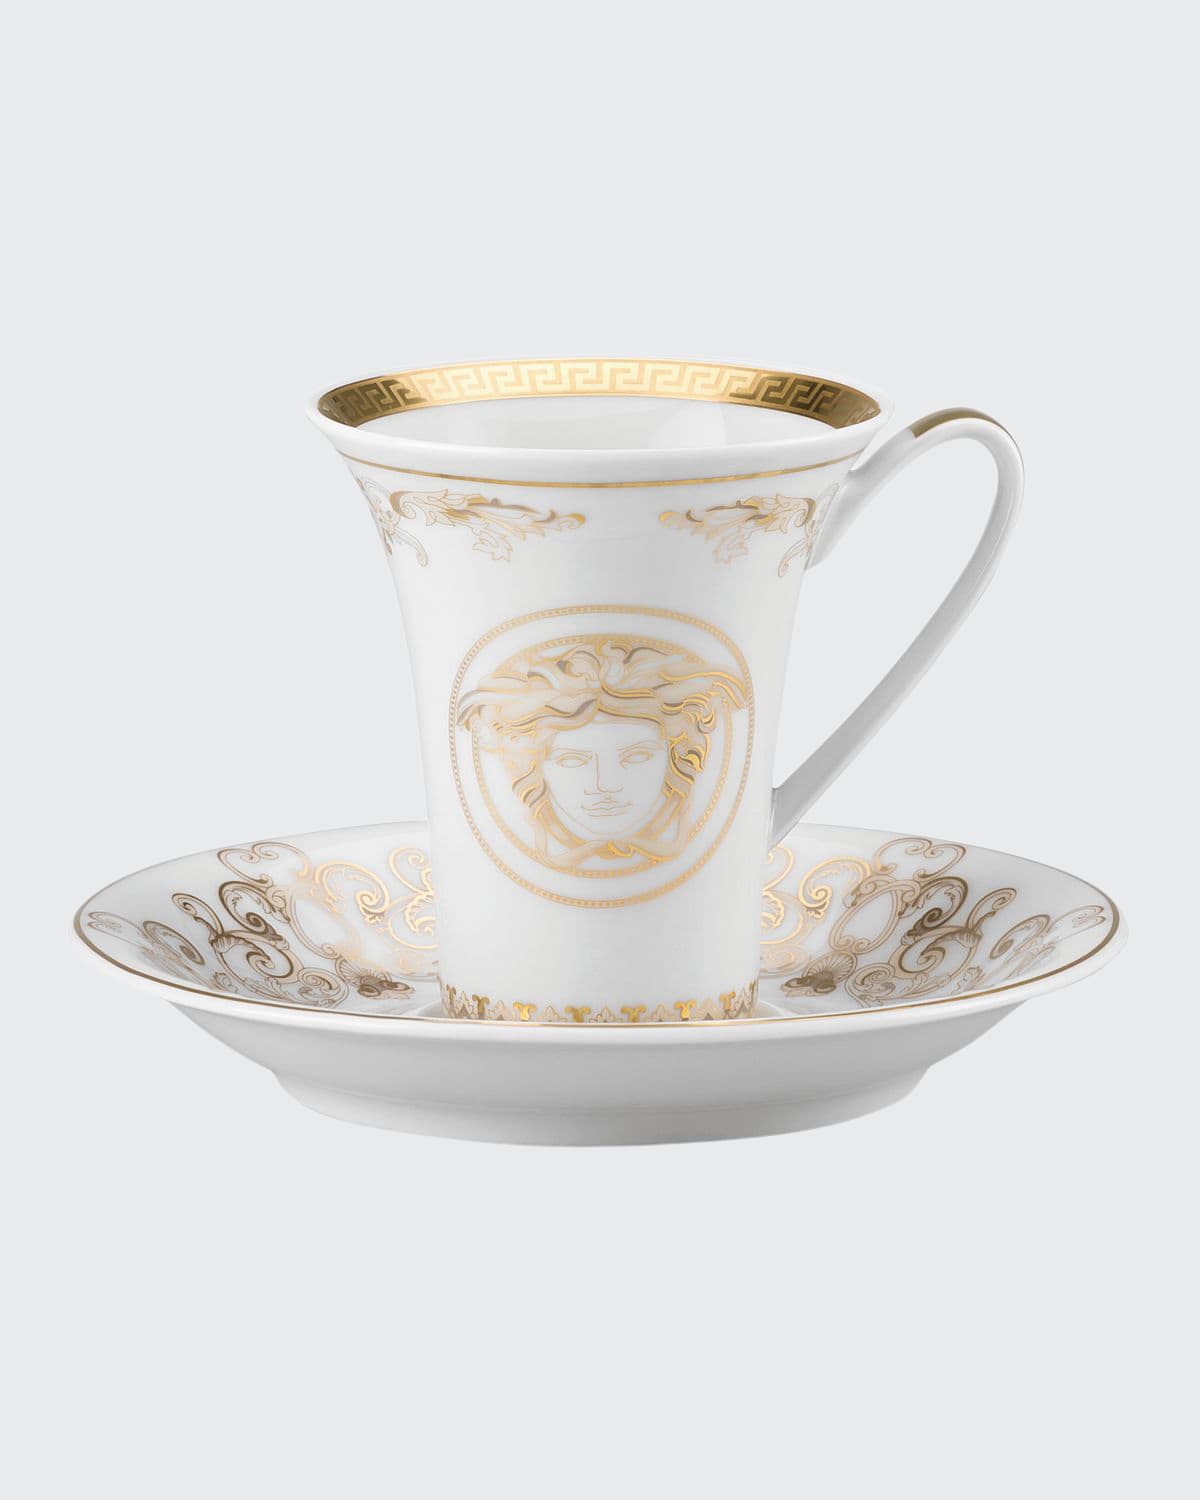 Versace Medusa Gala Gold A. D. Cup & Saucer In White And Gold